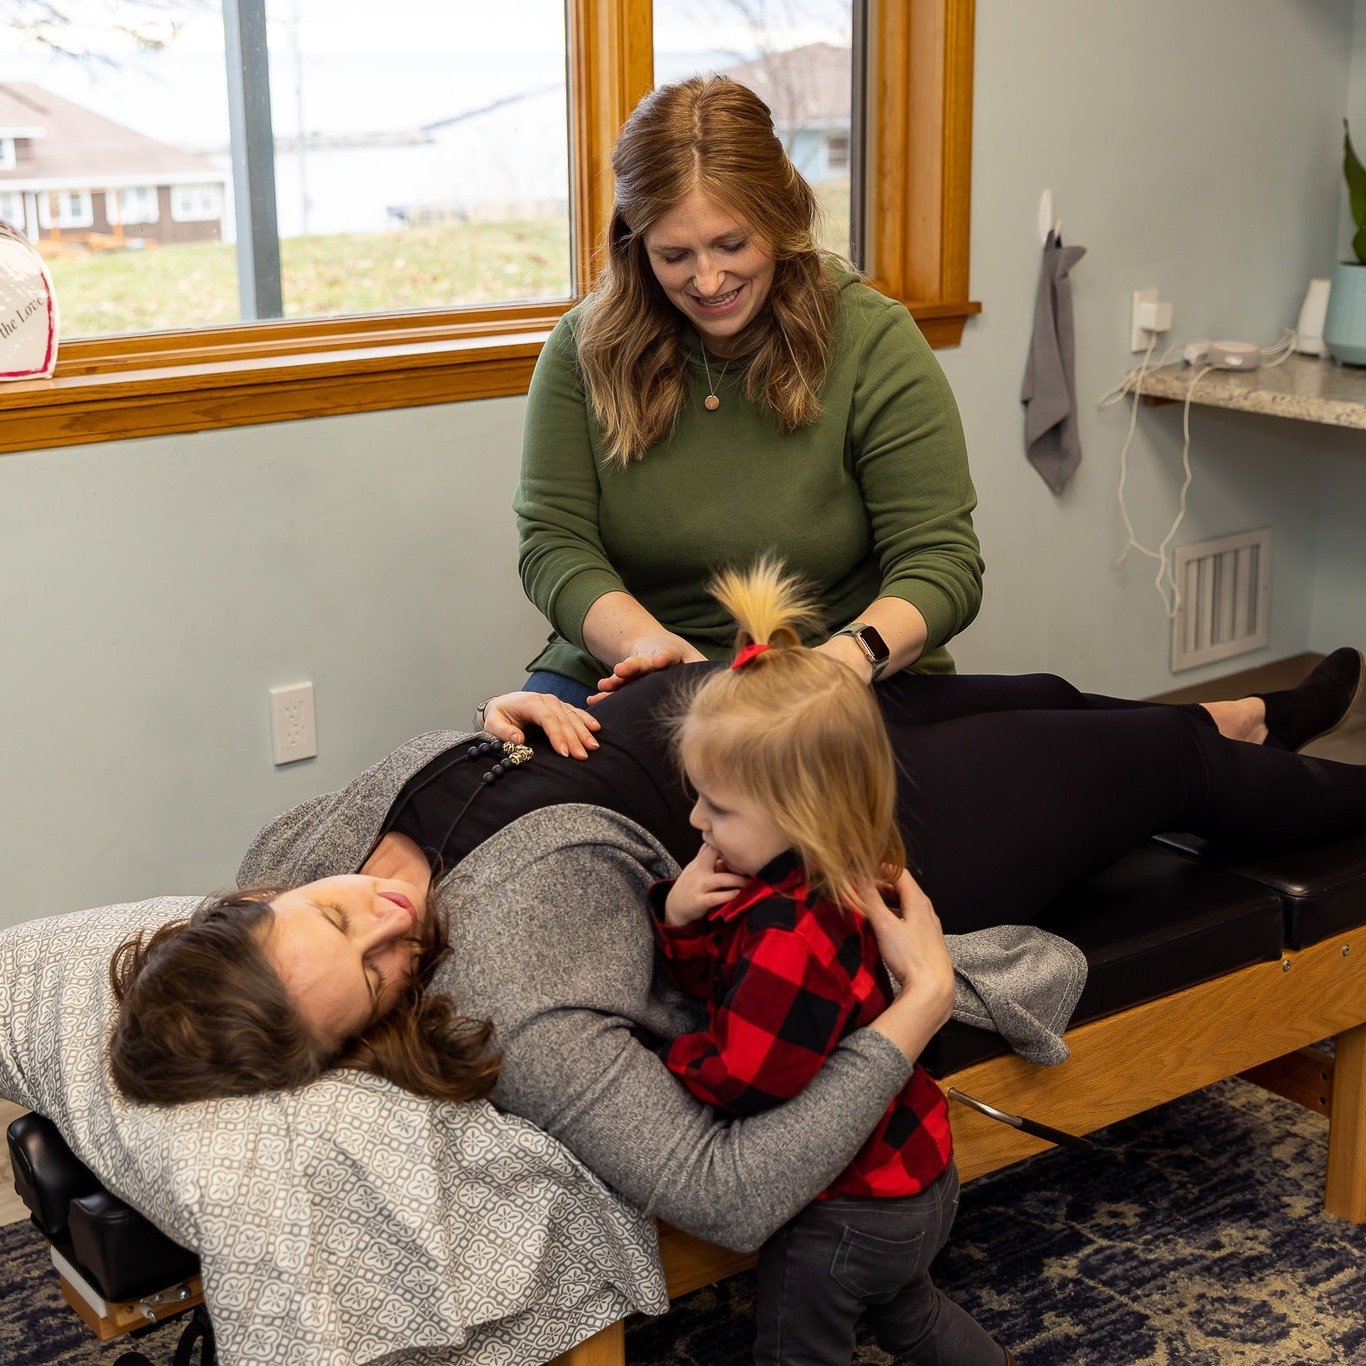 &quot;My OB recommended Dr. Nikki to me during my pregnancy, and I'm so glad she did! I cannot say enough good things about Dr. Nikki. She and her staff are fantastic! I always left feeling great and ready for labor. Less discomfort, no more headache